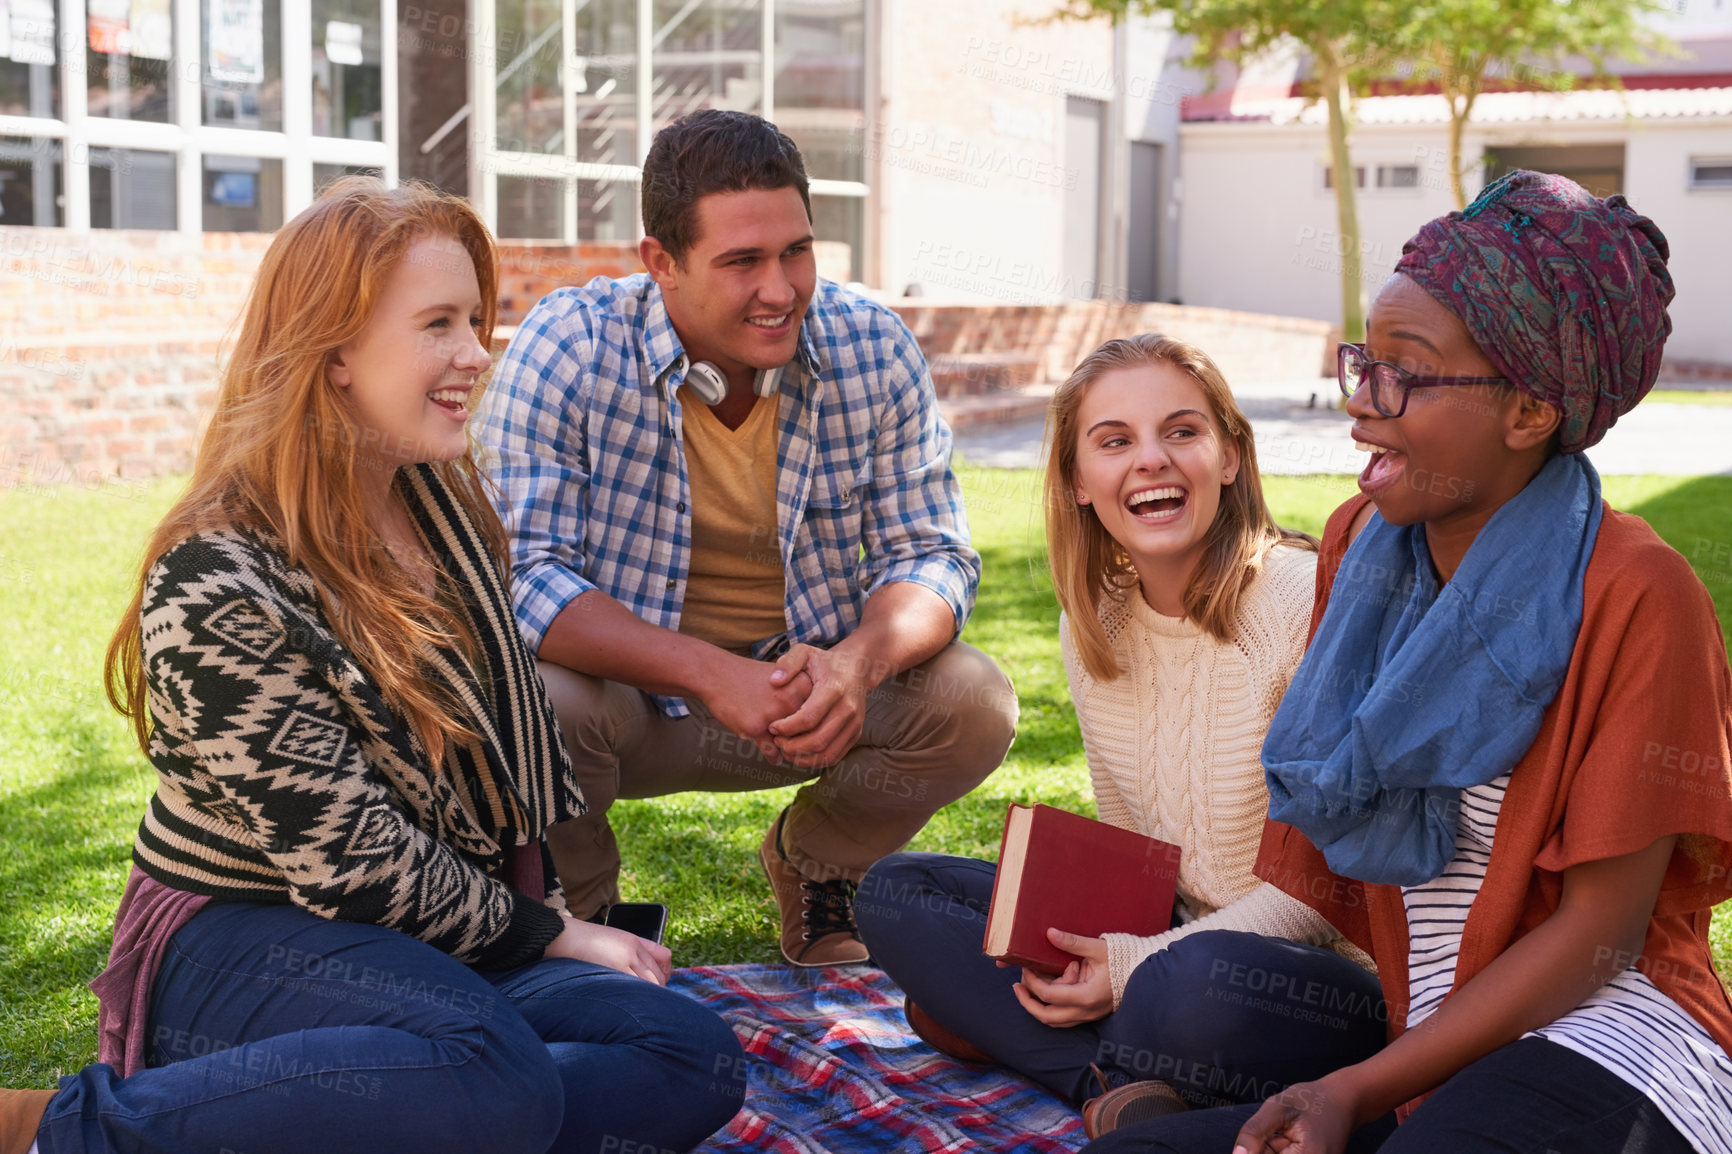 Buy stock photo Shot of a group of young friends having their study session outside